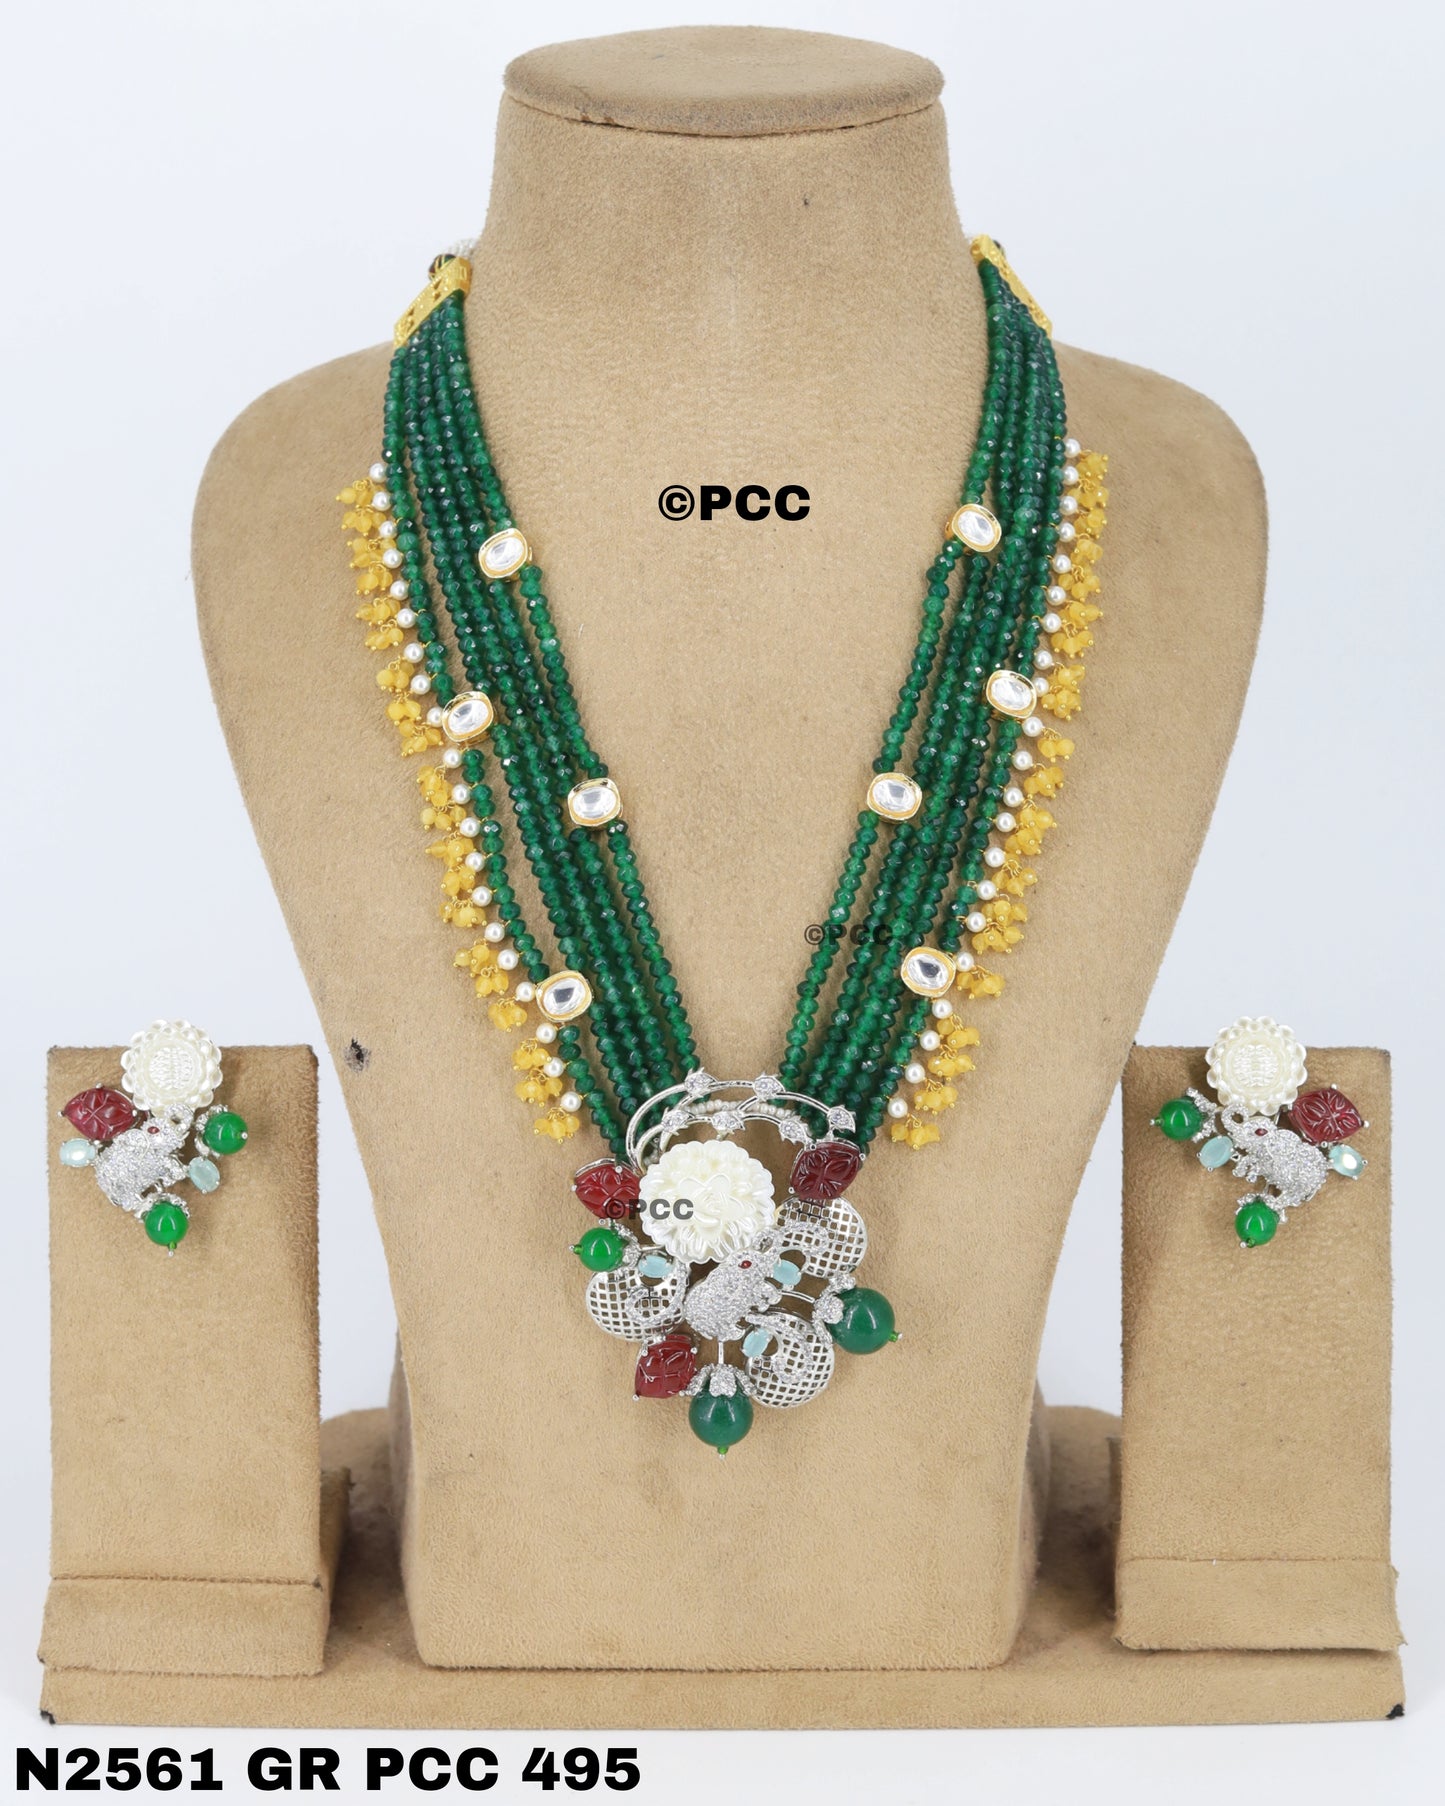 Designer Mother of Pearl Handmade Necklace set with Earrings